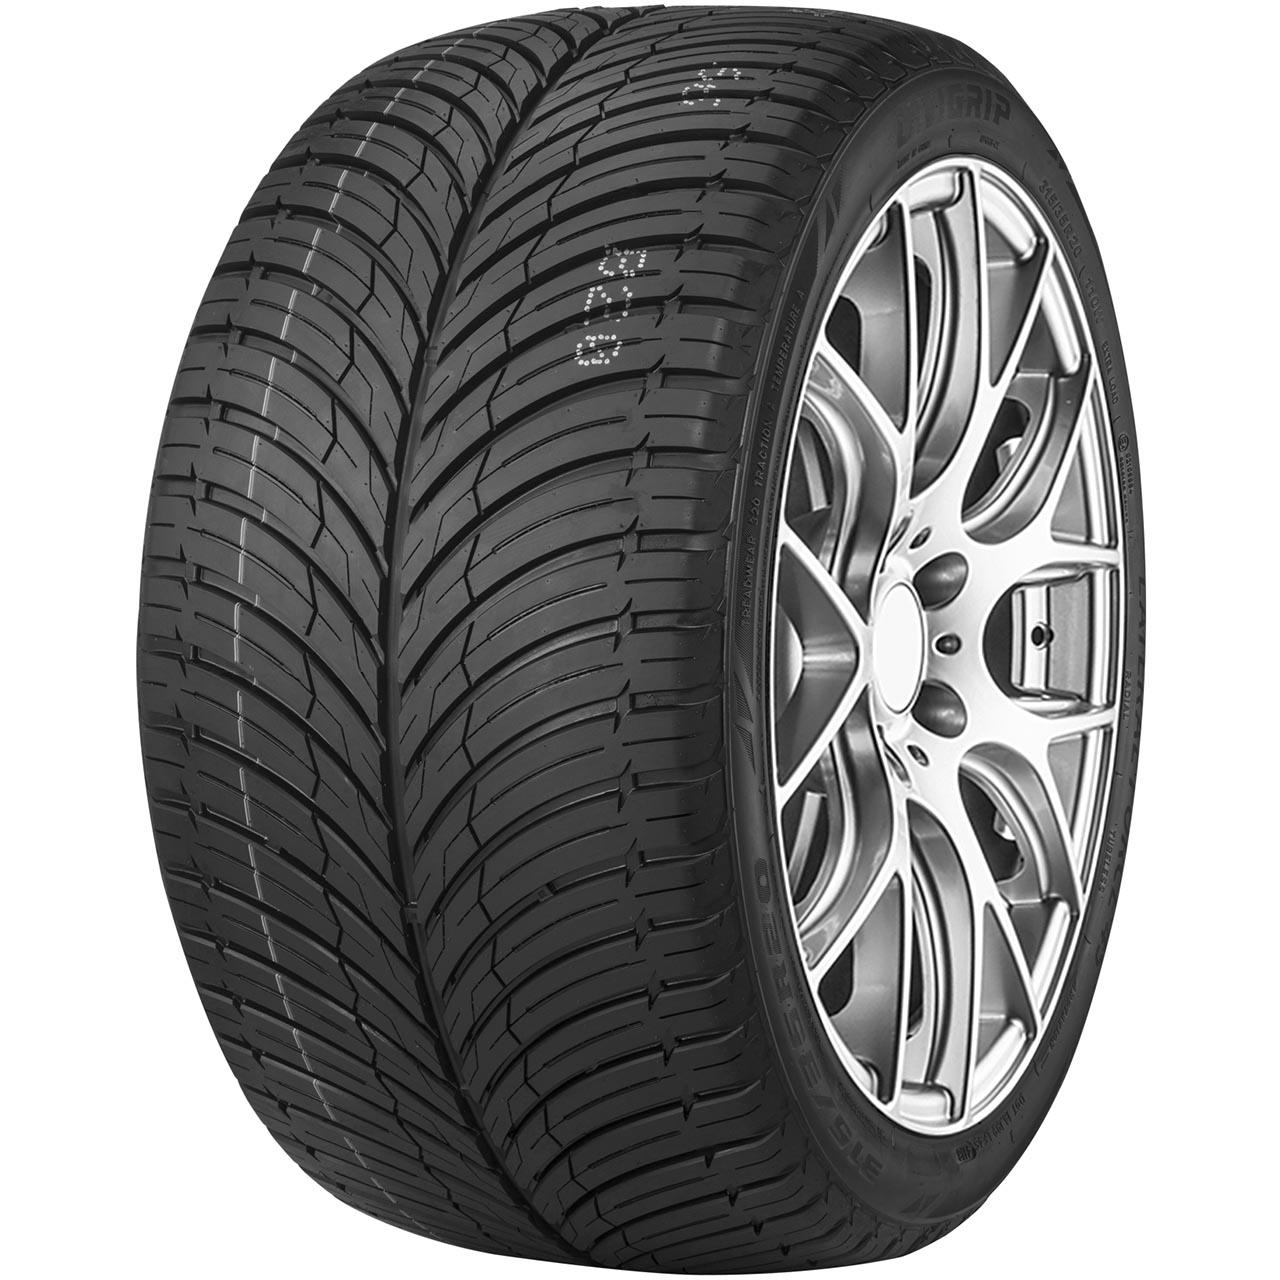 Unigrip Lateral Force 4S 225/45R19 96W XL